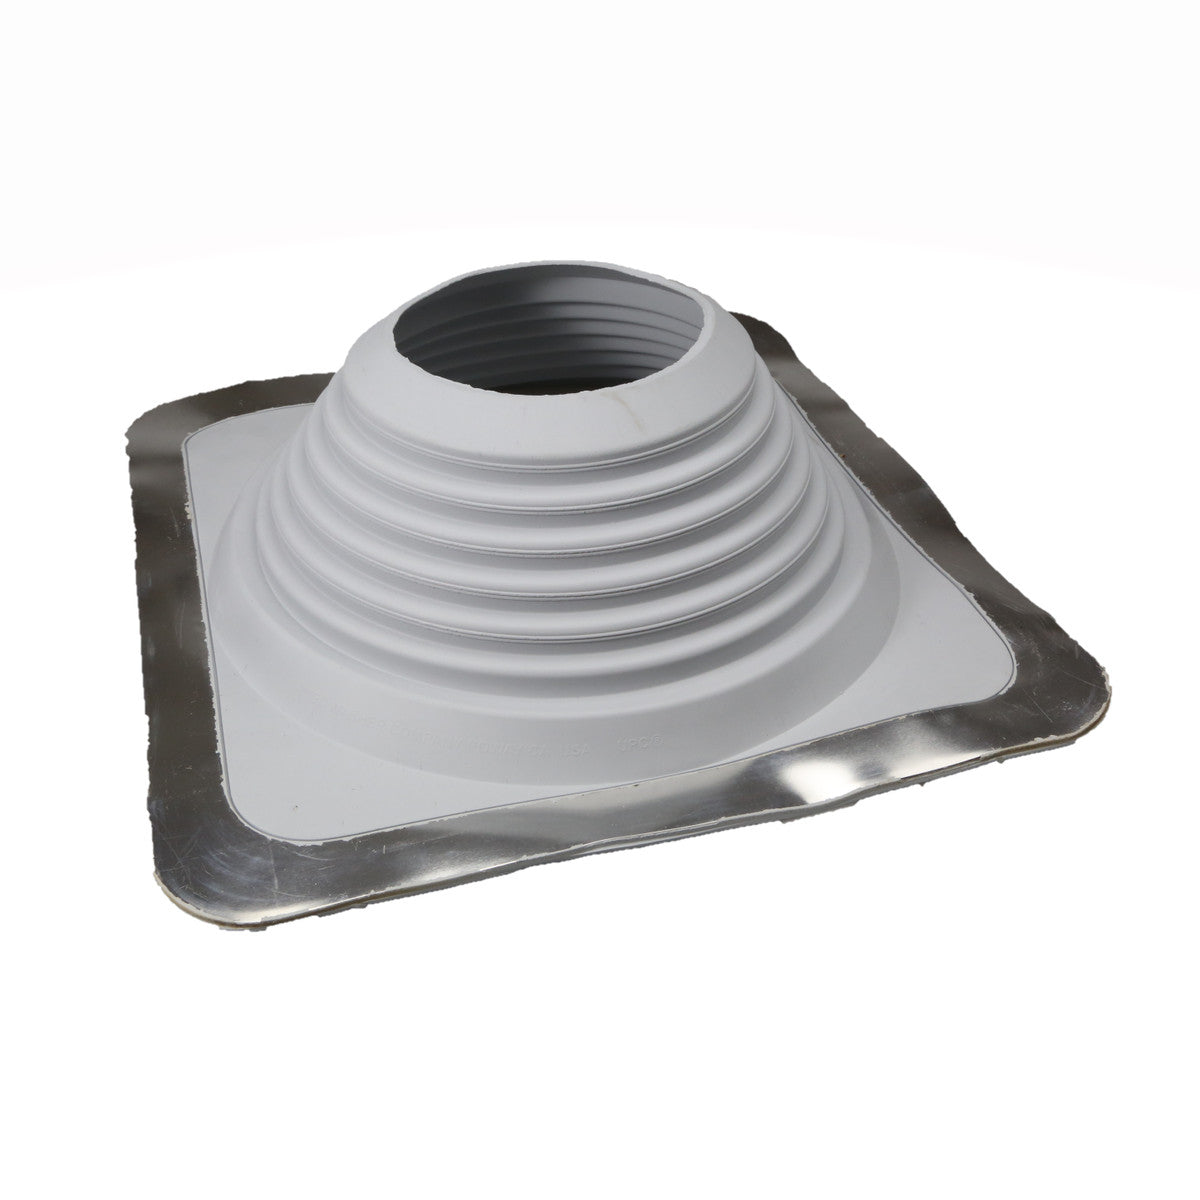 #8 Roofjack Square EPDM Pipe Flashing Boot, Gray